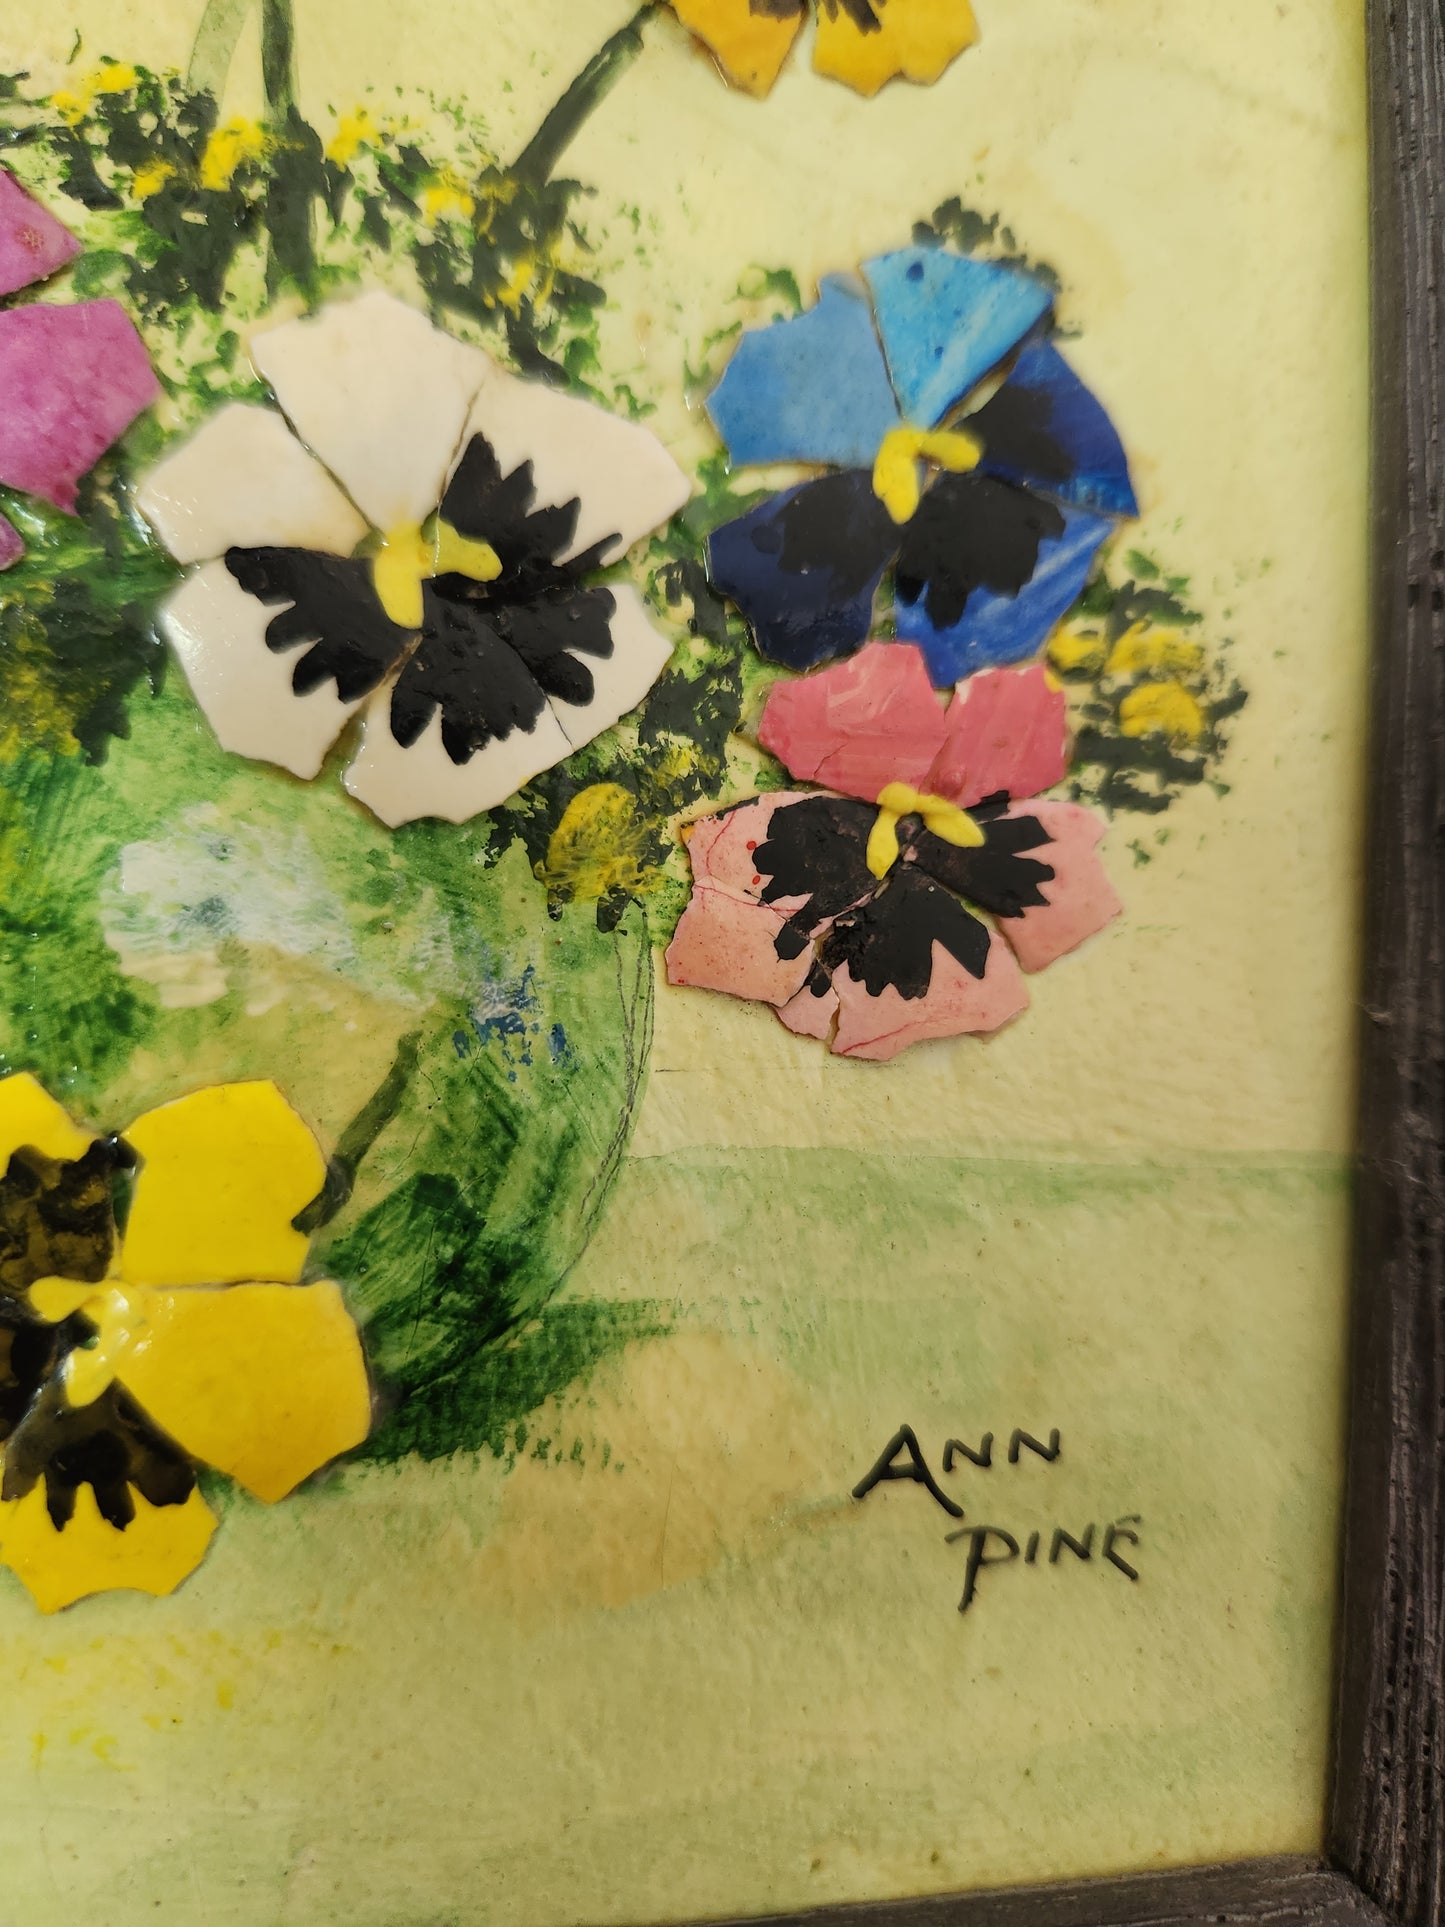 Signed ANN PINE 5x7 Oil and Lacquered Eggshell Painting in wood frame